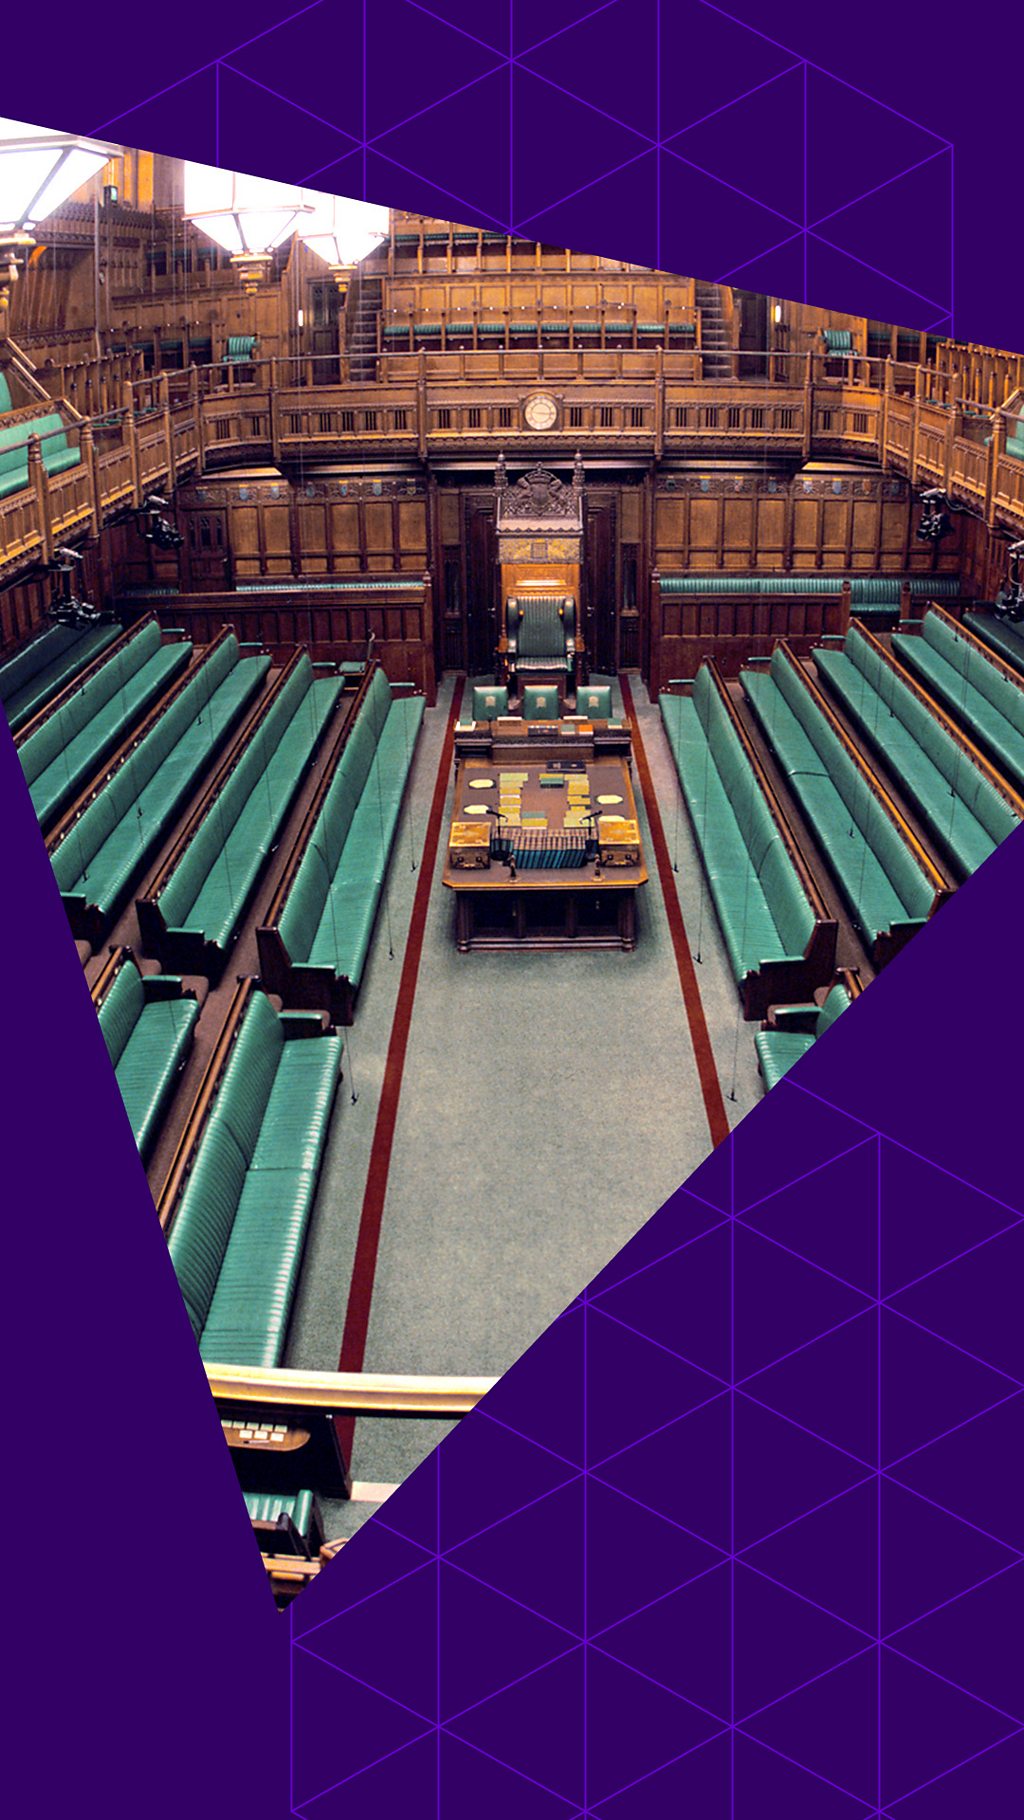 The interior of the House of Commons green benches with a purple triangle graphic on top